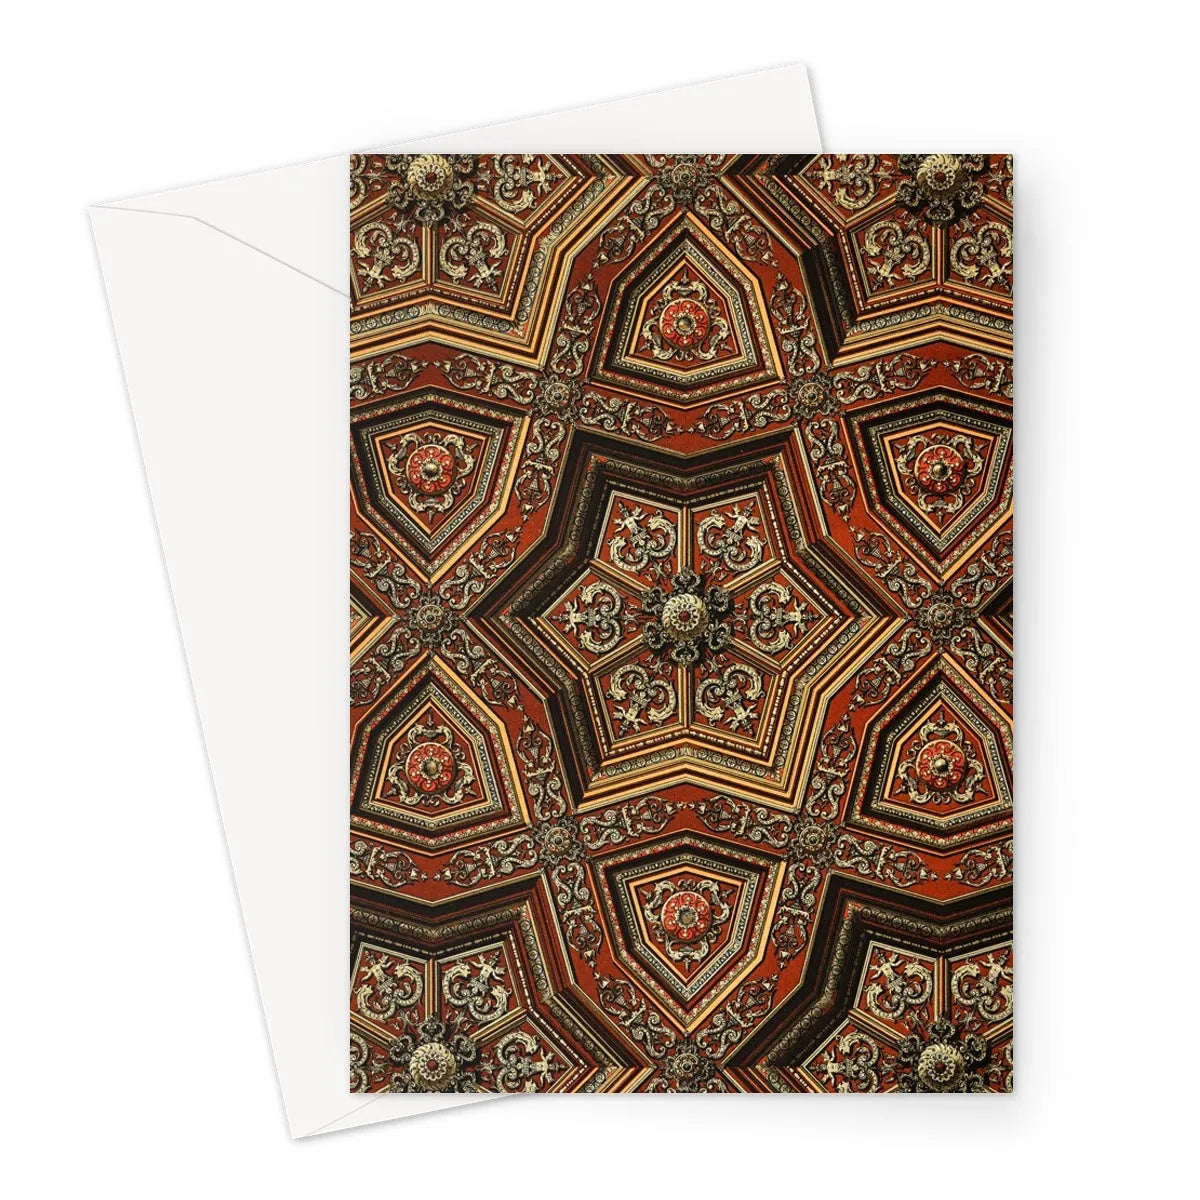 Renaissance Pattern By Auguste Racinet Greeting Card - A5 Portrait / 1 Card - Notebooks & Notepads - Aesthetic Art